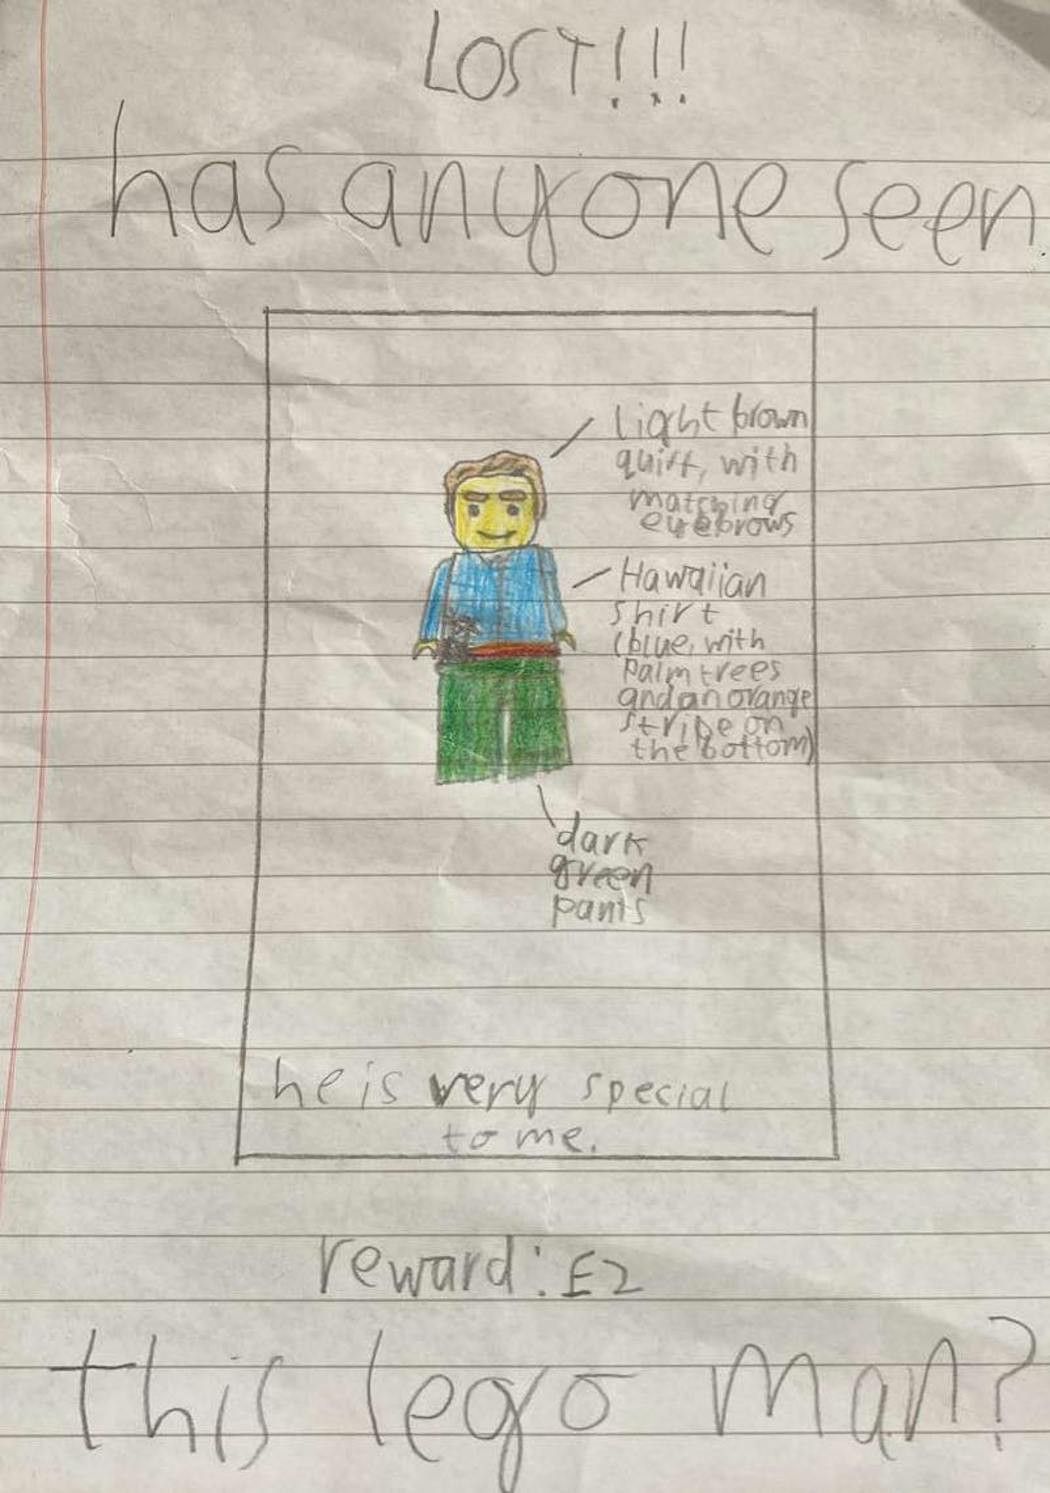 The missing-person poster that Jack created.